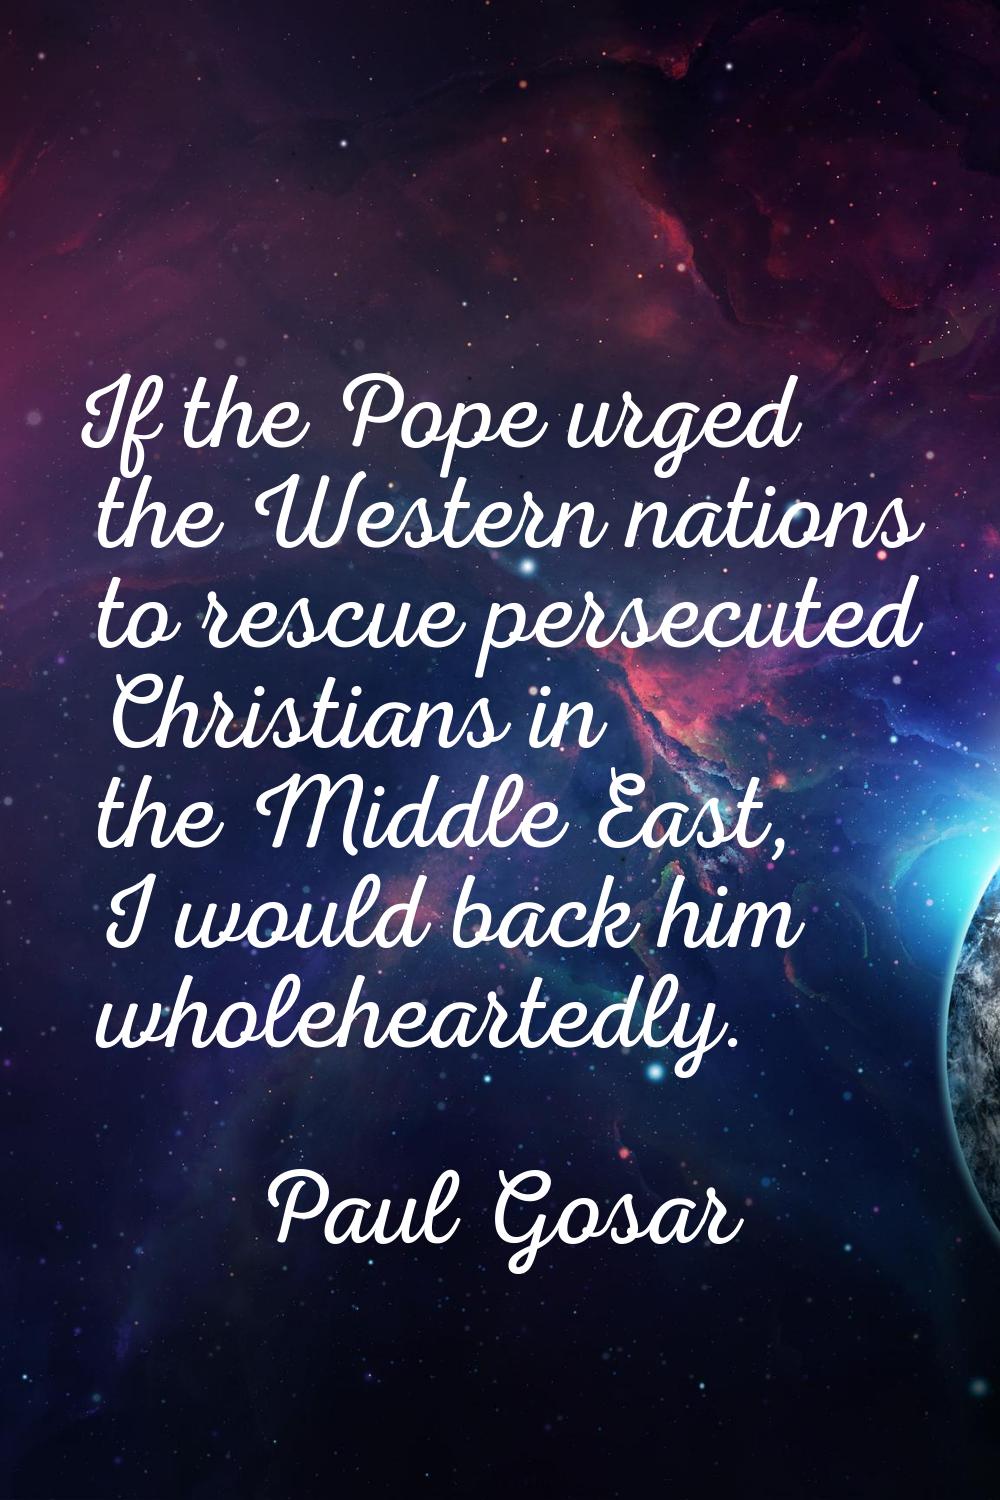 If the Pope urged the Western nations to rescue persecuted Christians in the Middle East, I would b